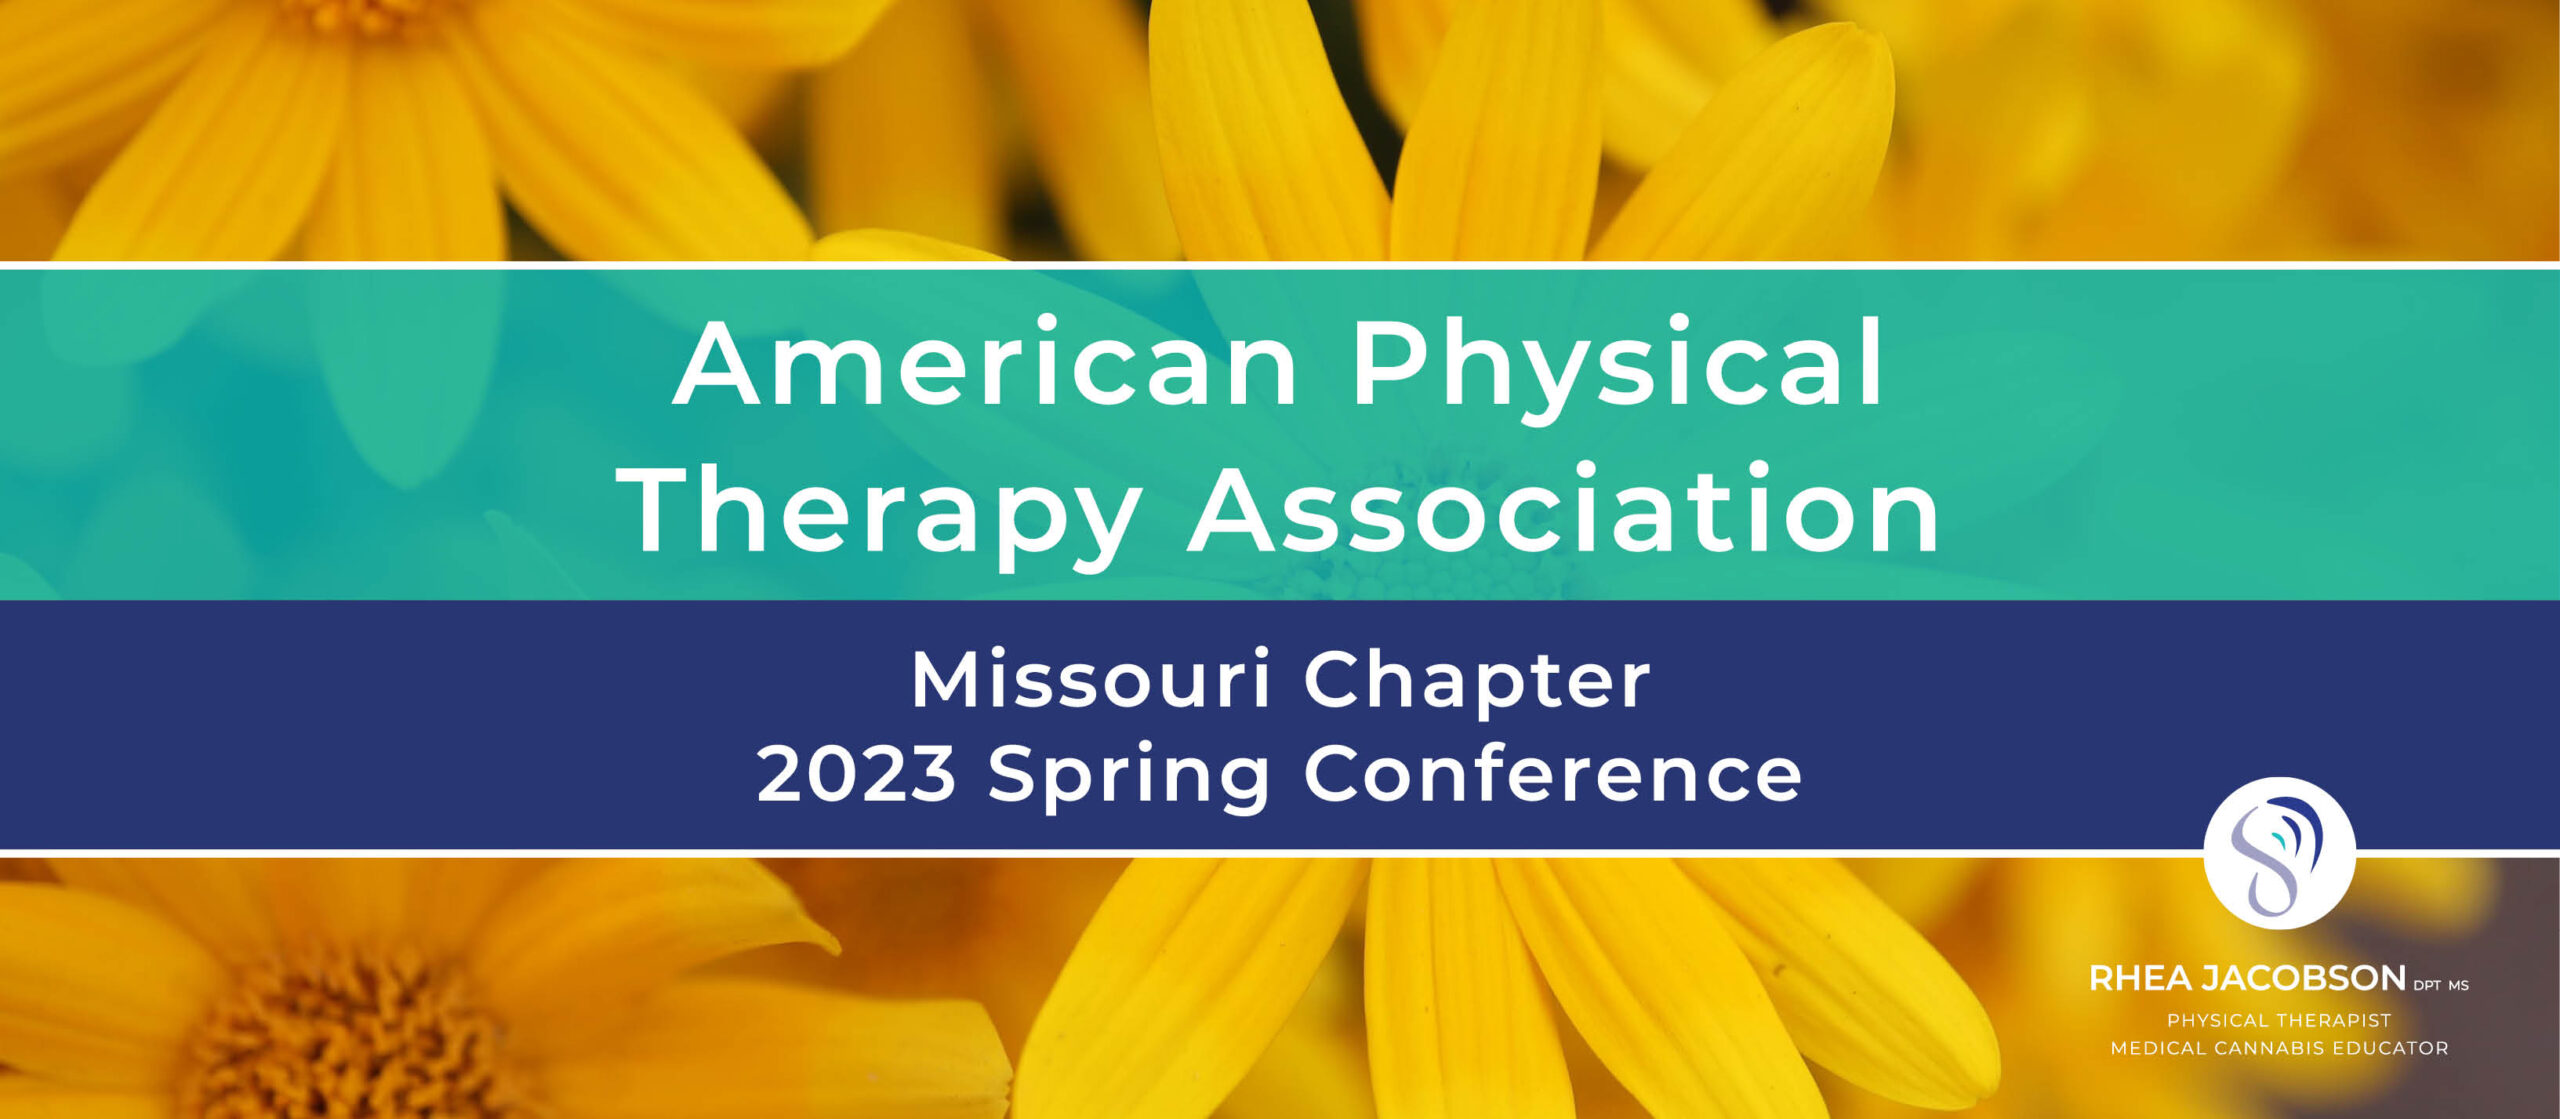 American Physical Therapy Association Missouri Chapter 2023 Spring Conference